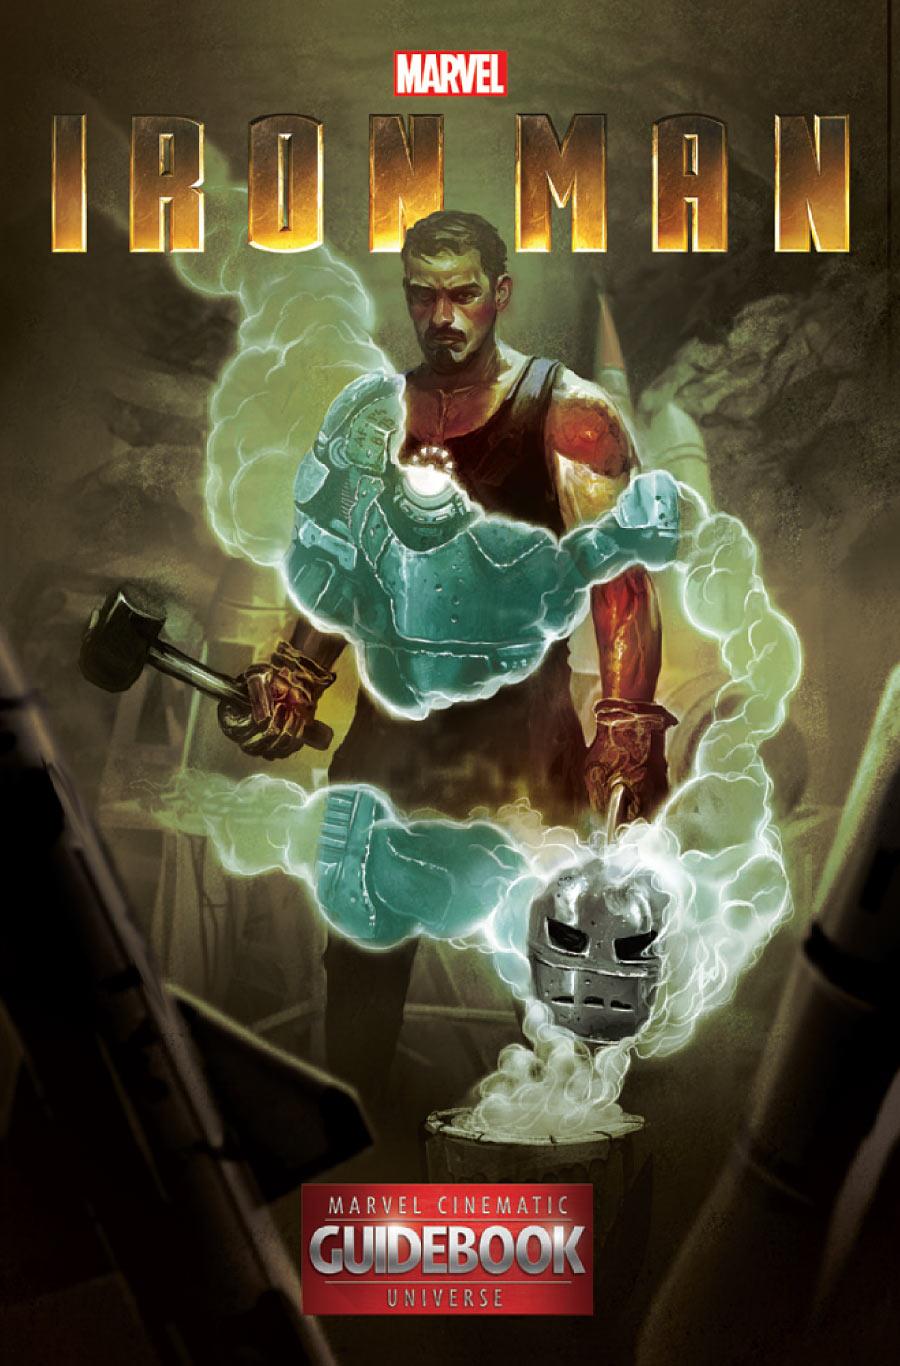 Guidebook to the Marvel Cinematic Universe - Marvel's Iron Man Vol. 1 #1